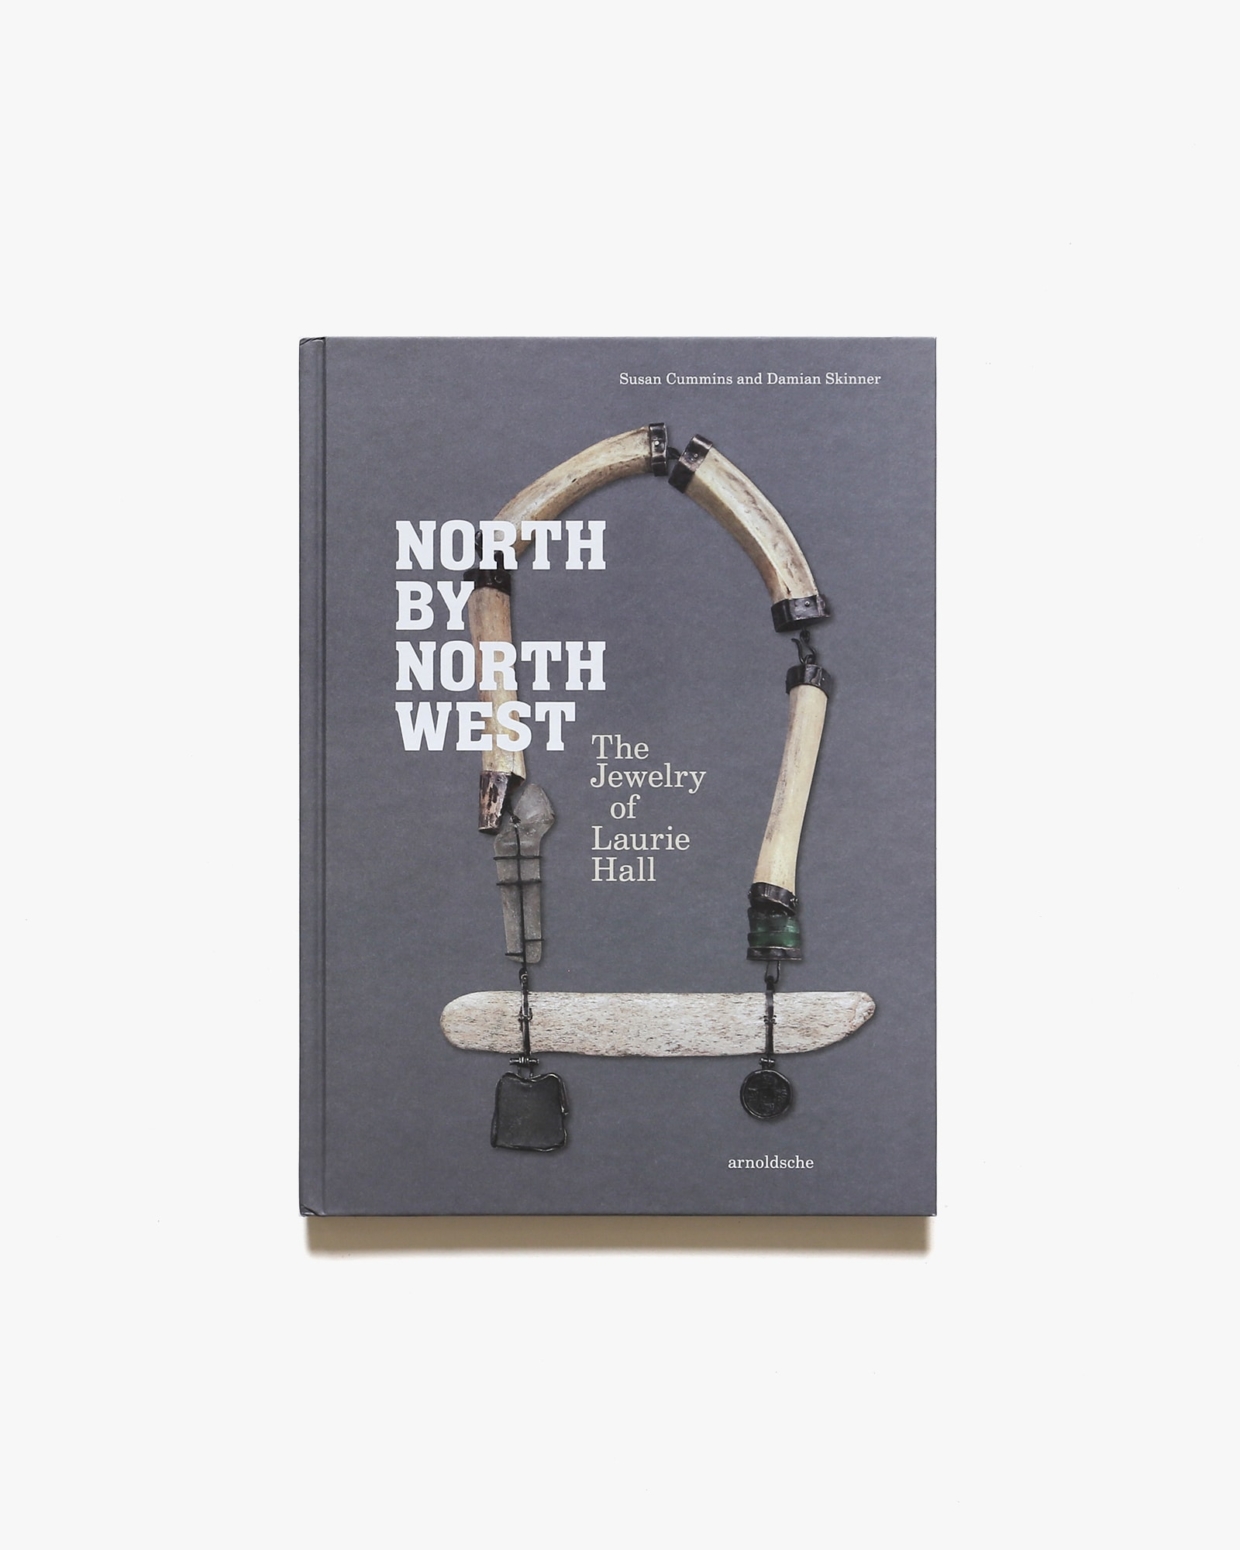 North by Northwest: The Jewelry of Laurie Hall | Susan Cummins、Damian Skinner